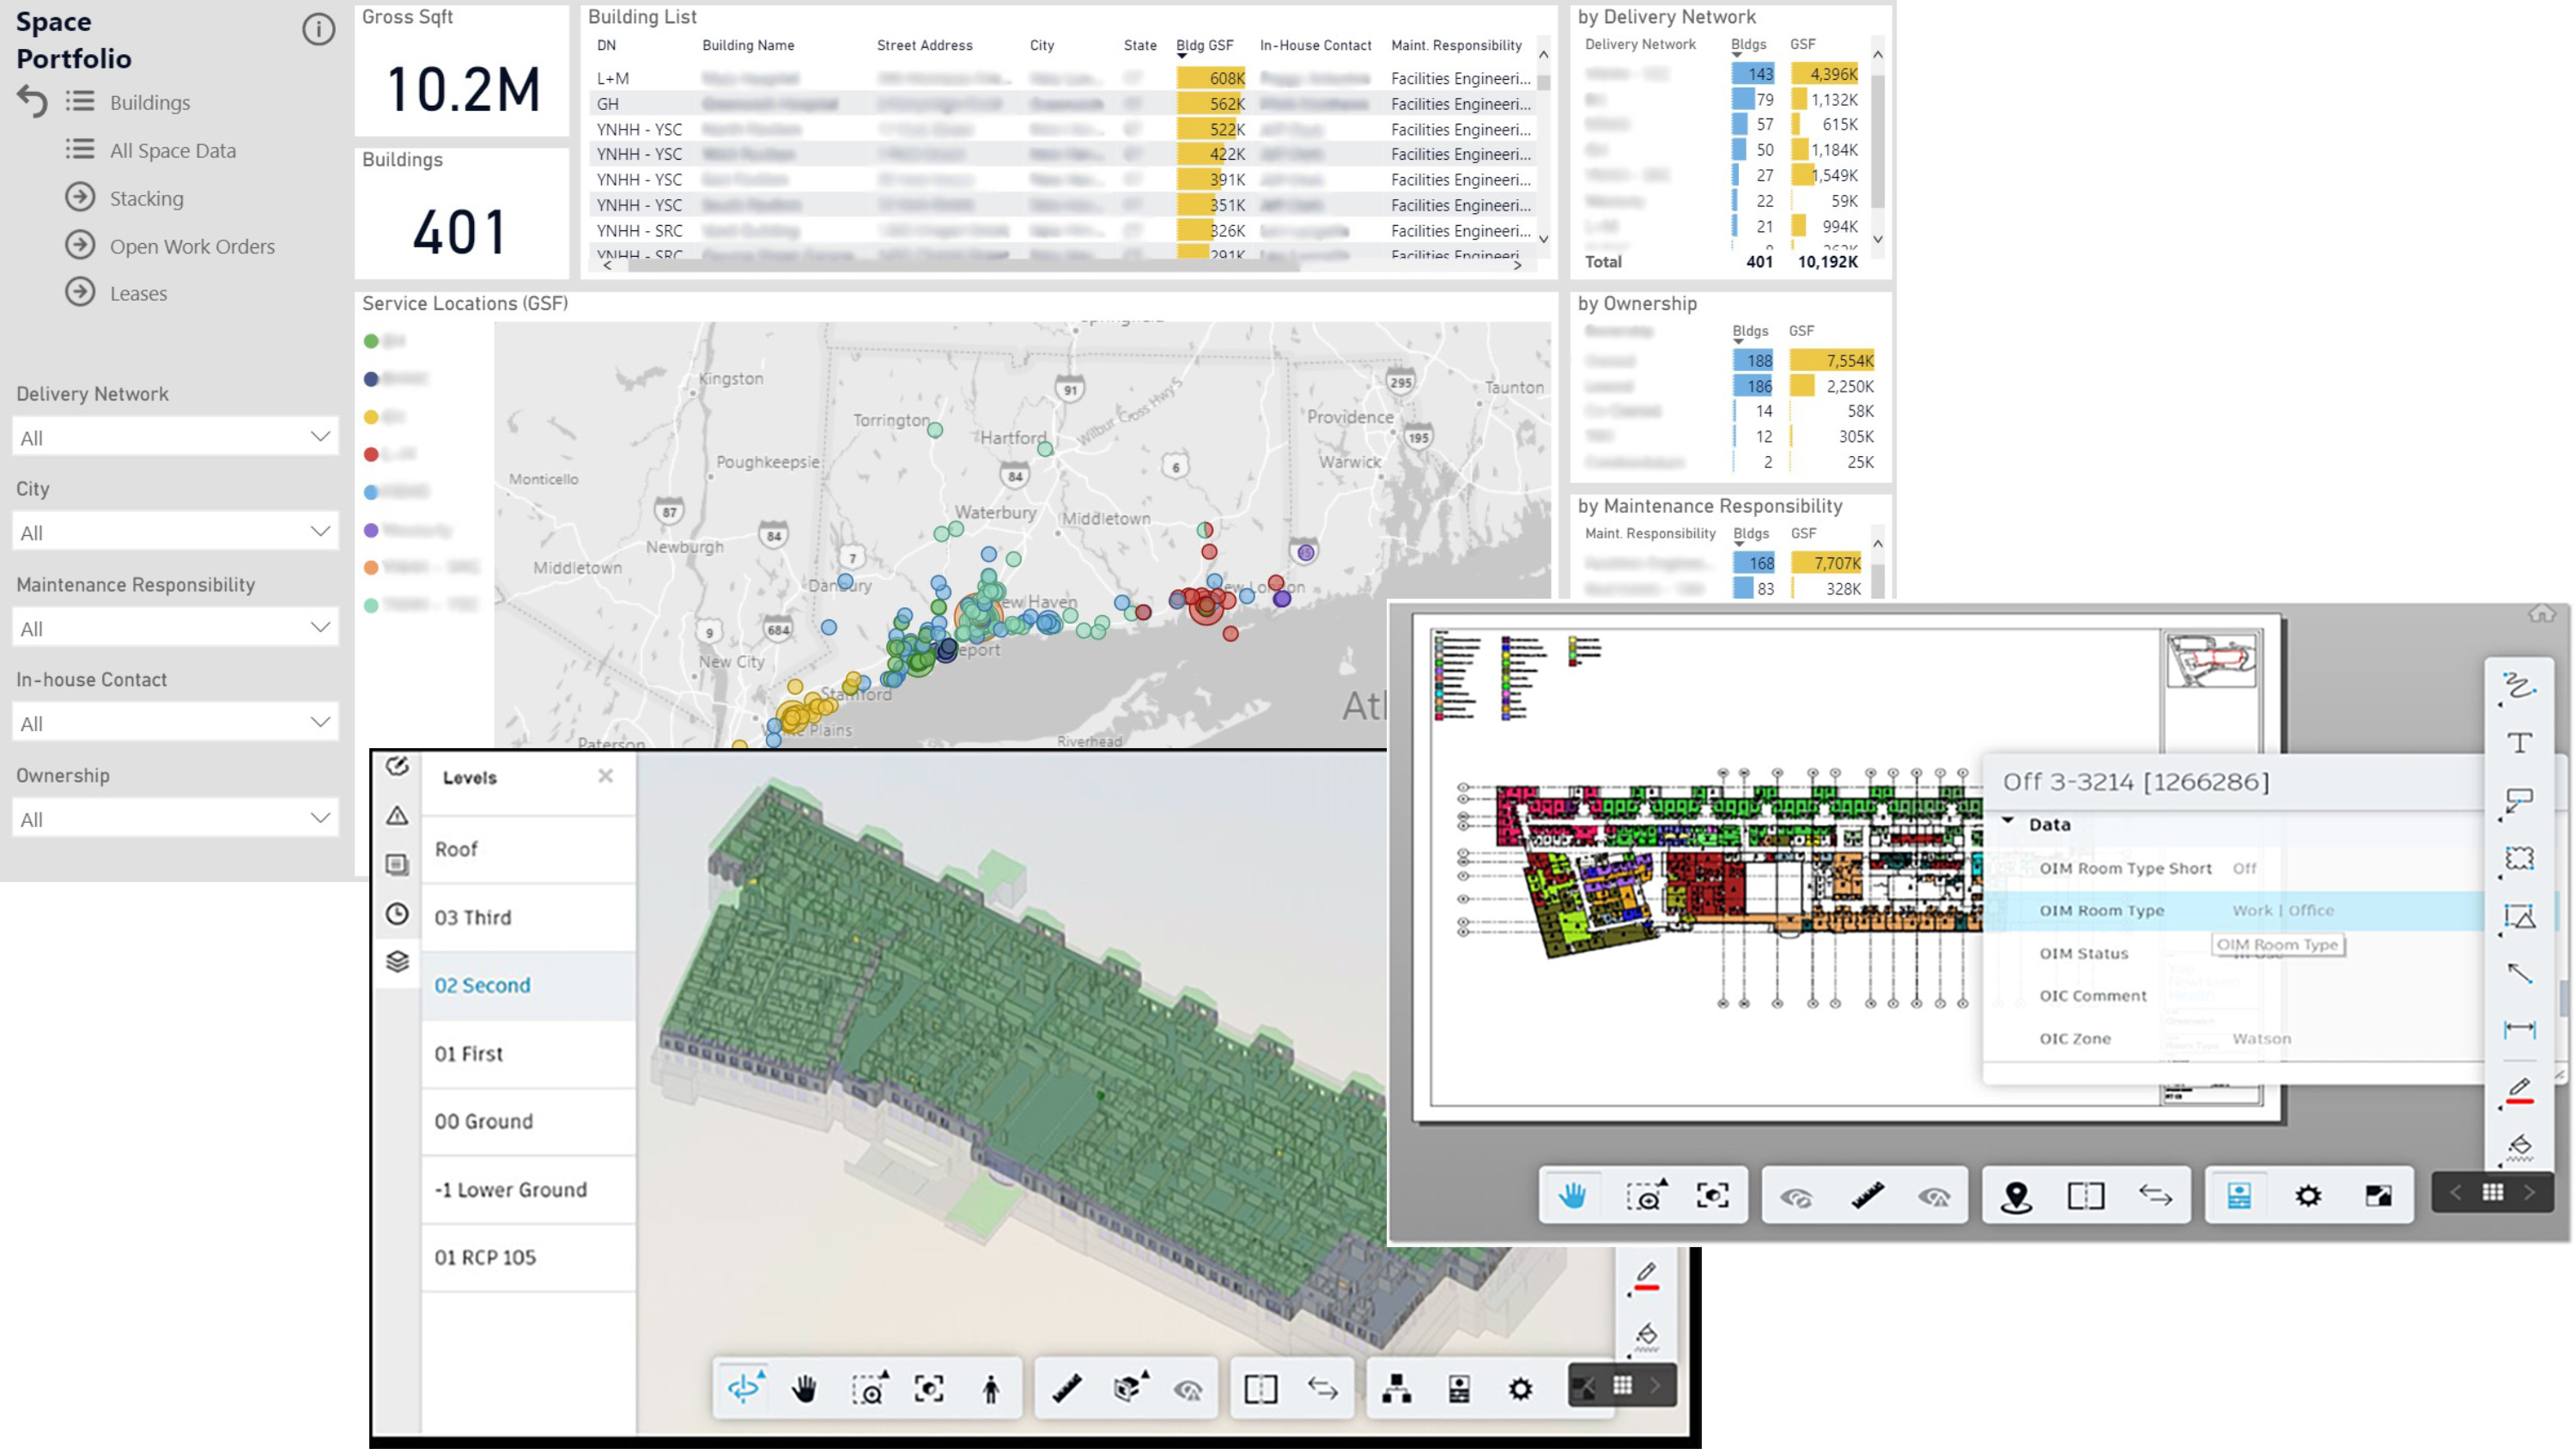 YNHH’s space inventory is being migrated into Revit to support system-wide analytics to optimize space use.